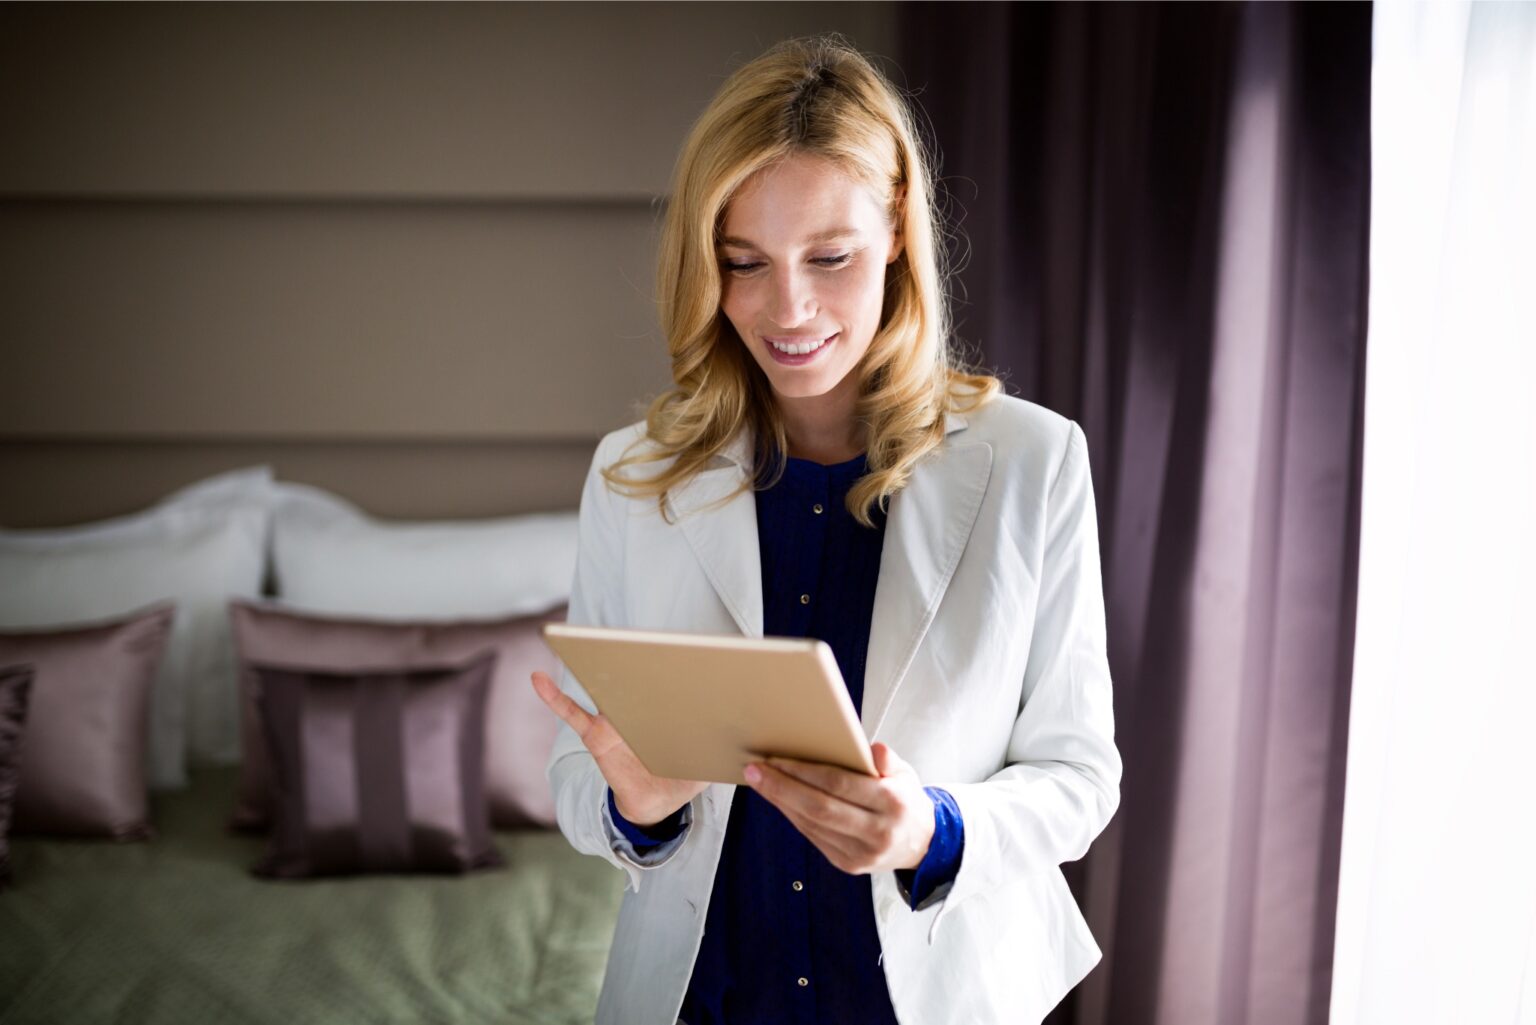 Woman standing in a hotel room using a tablet.jpg